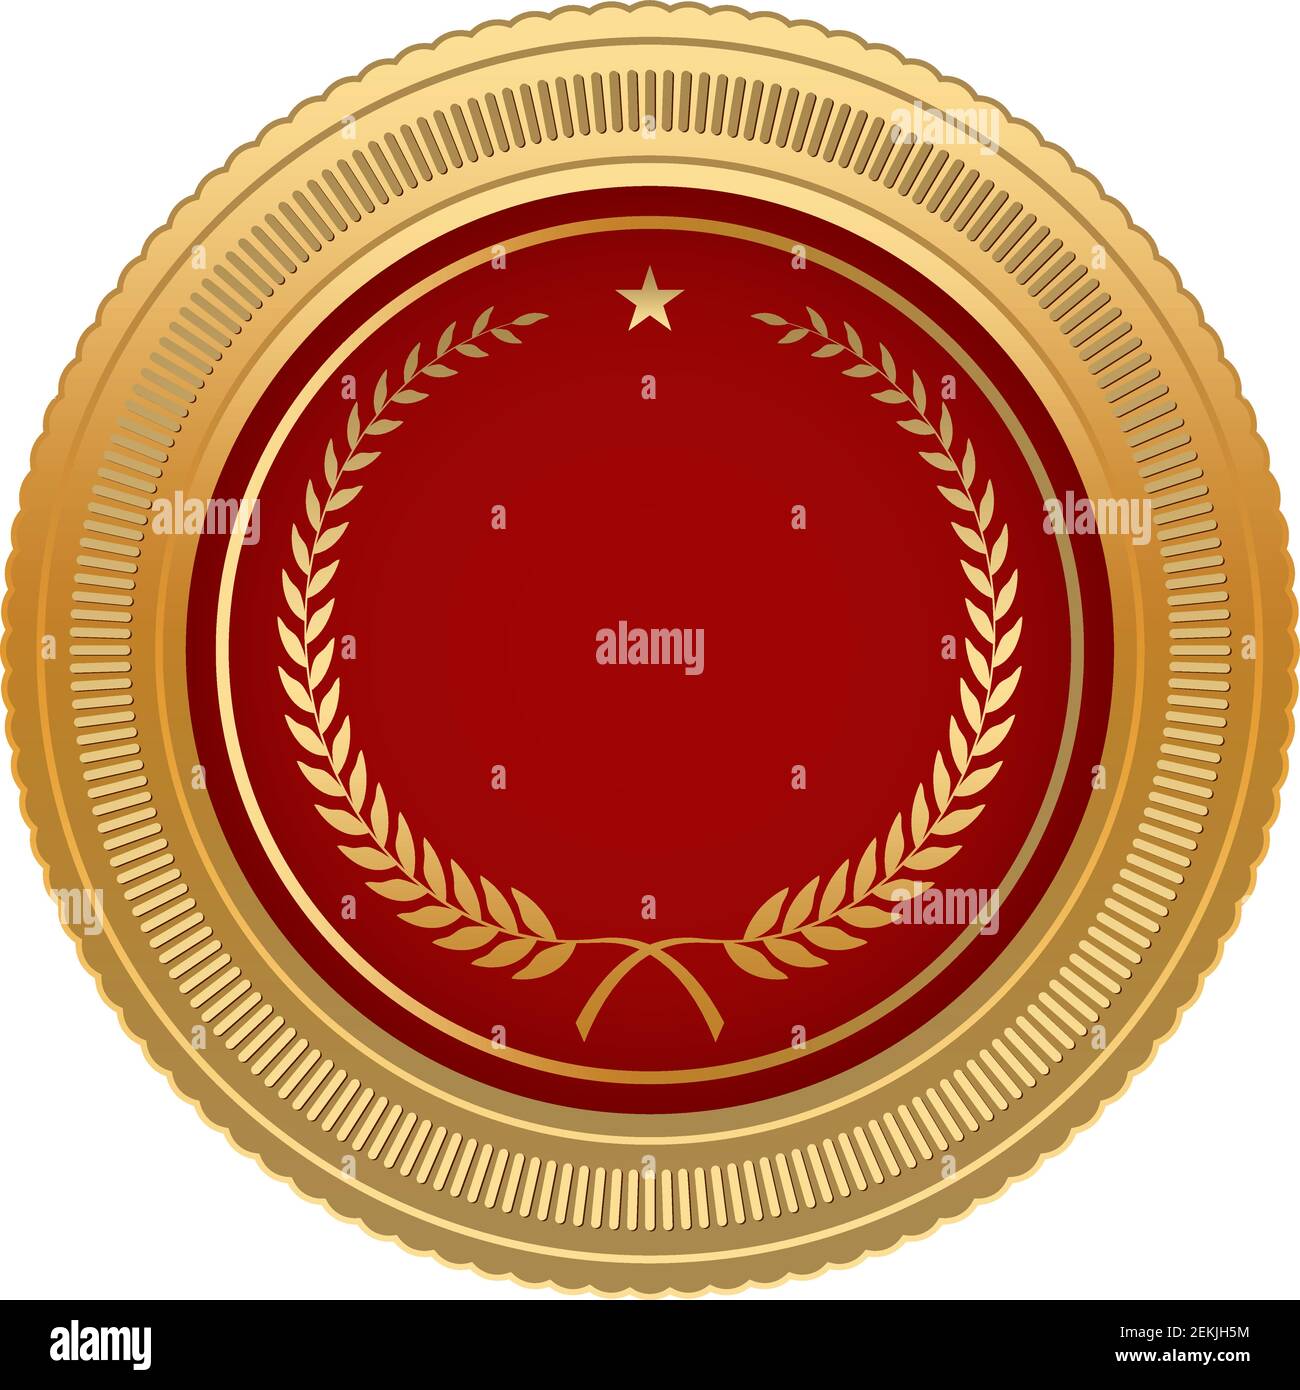 Medal Award vector with gold frame and red medal on white isolated back. Vector Illustration with gold frame, laurel wreath, star and red medal. Stock Vector